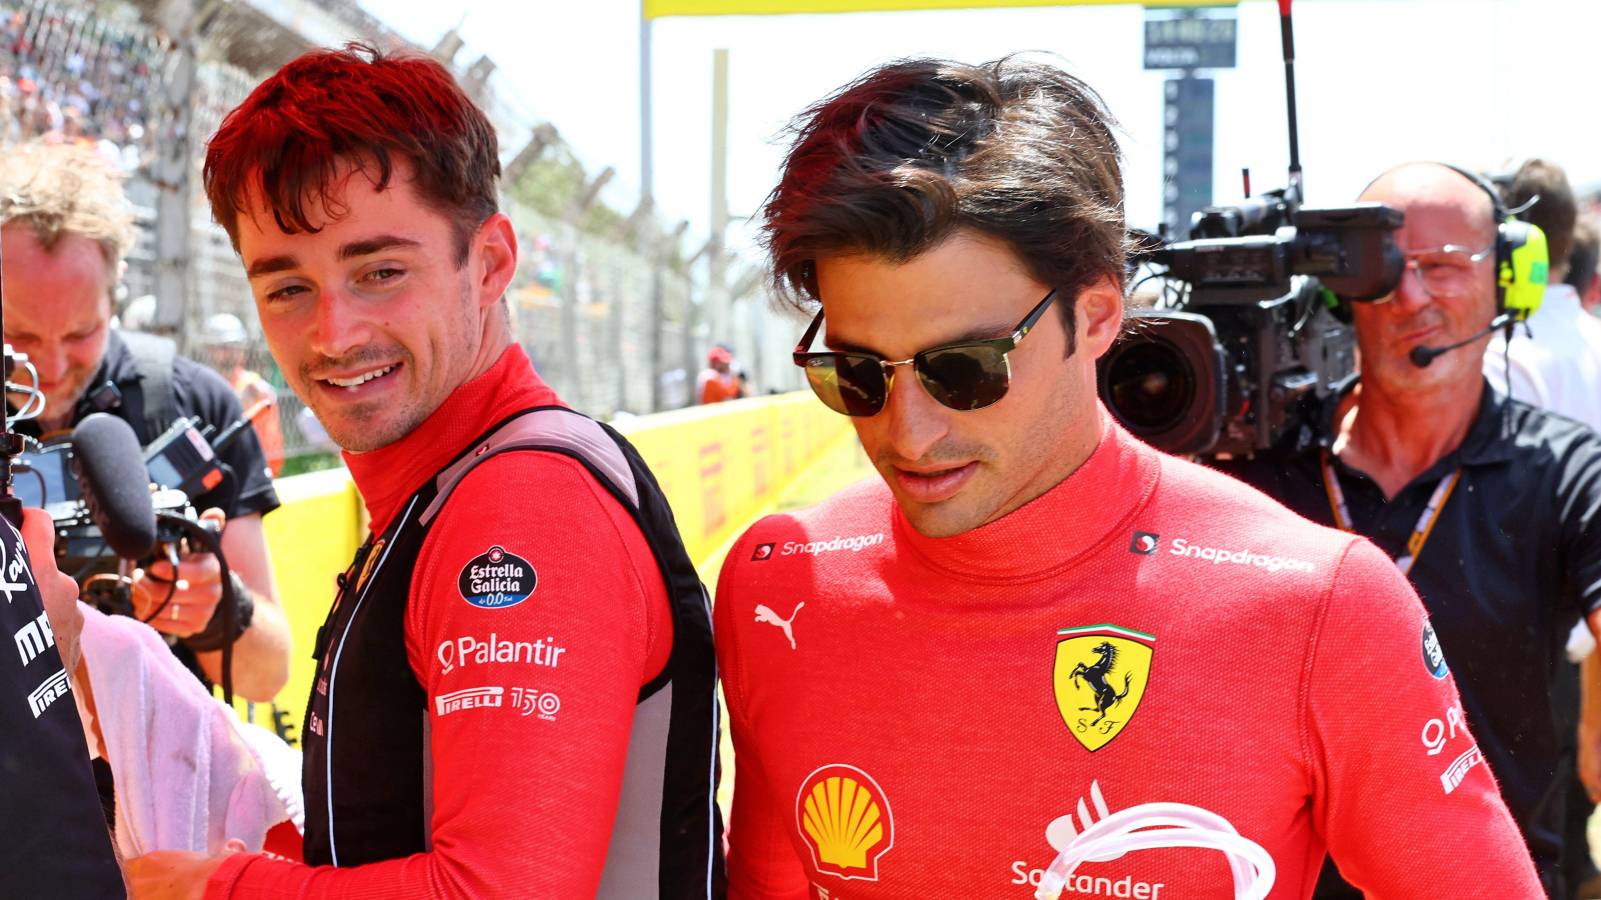 Charles Leclerc and Carlos Sainz on the grid. Barcelona May 2022.